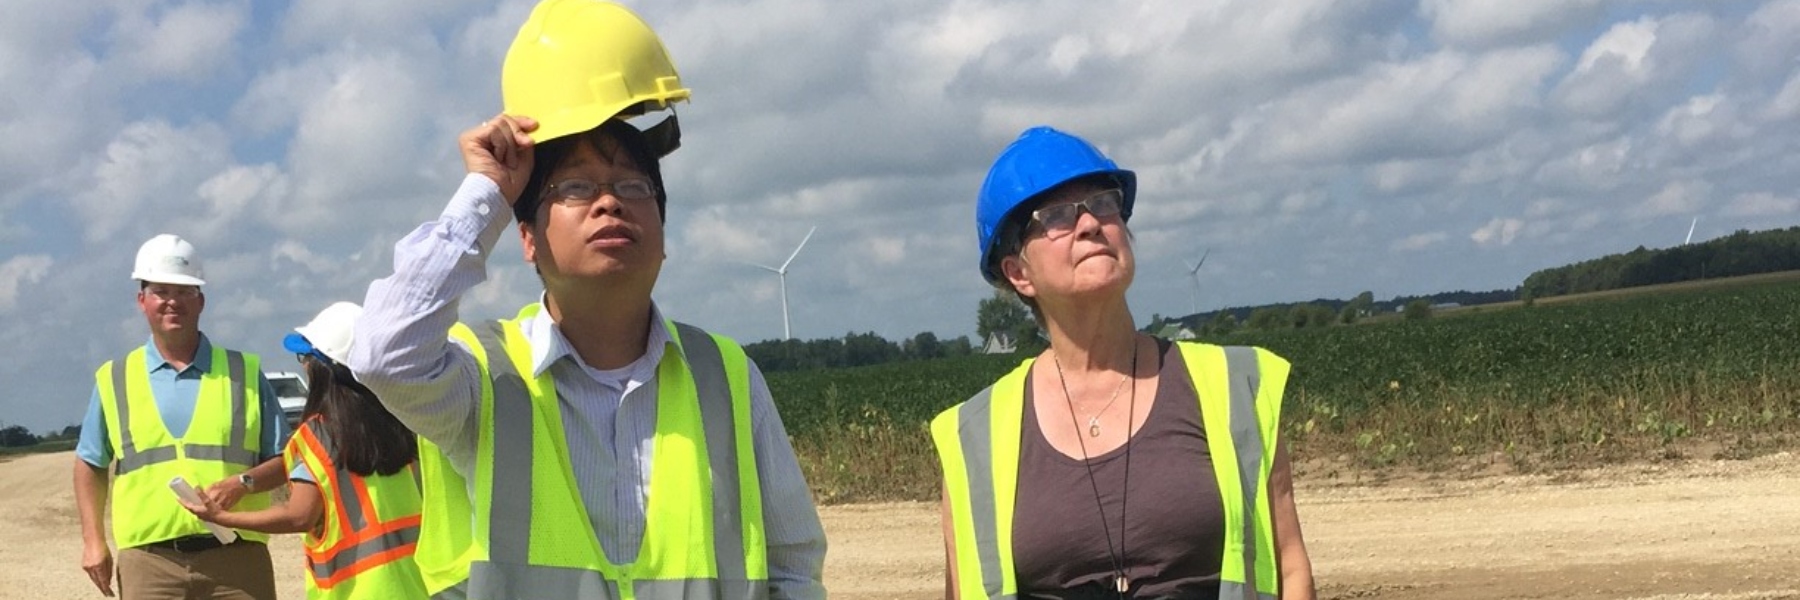 People in vests and hardhats standing in front of wind turbines